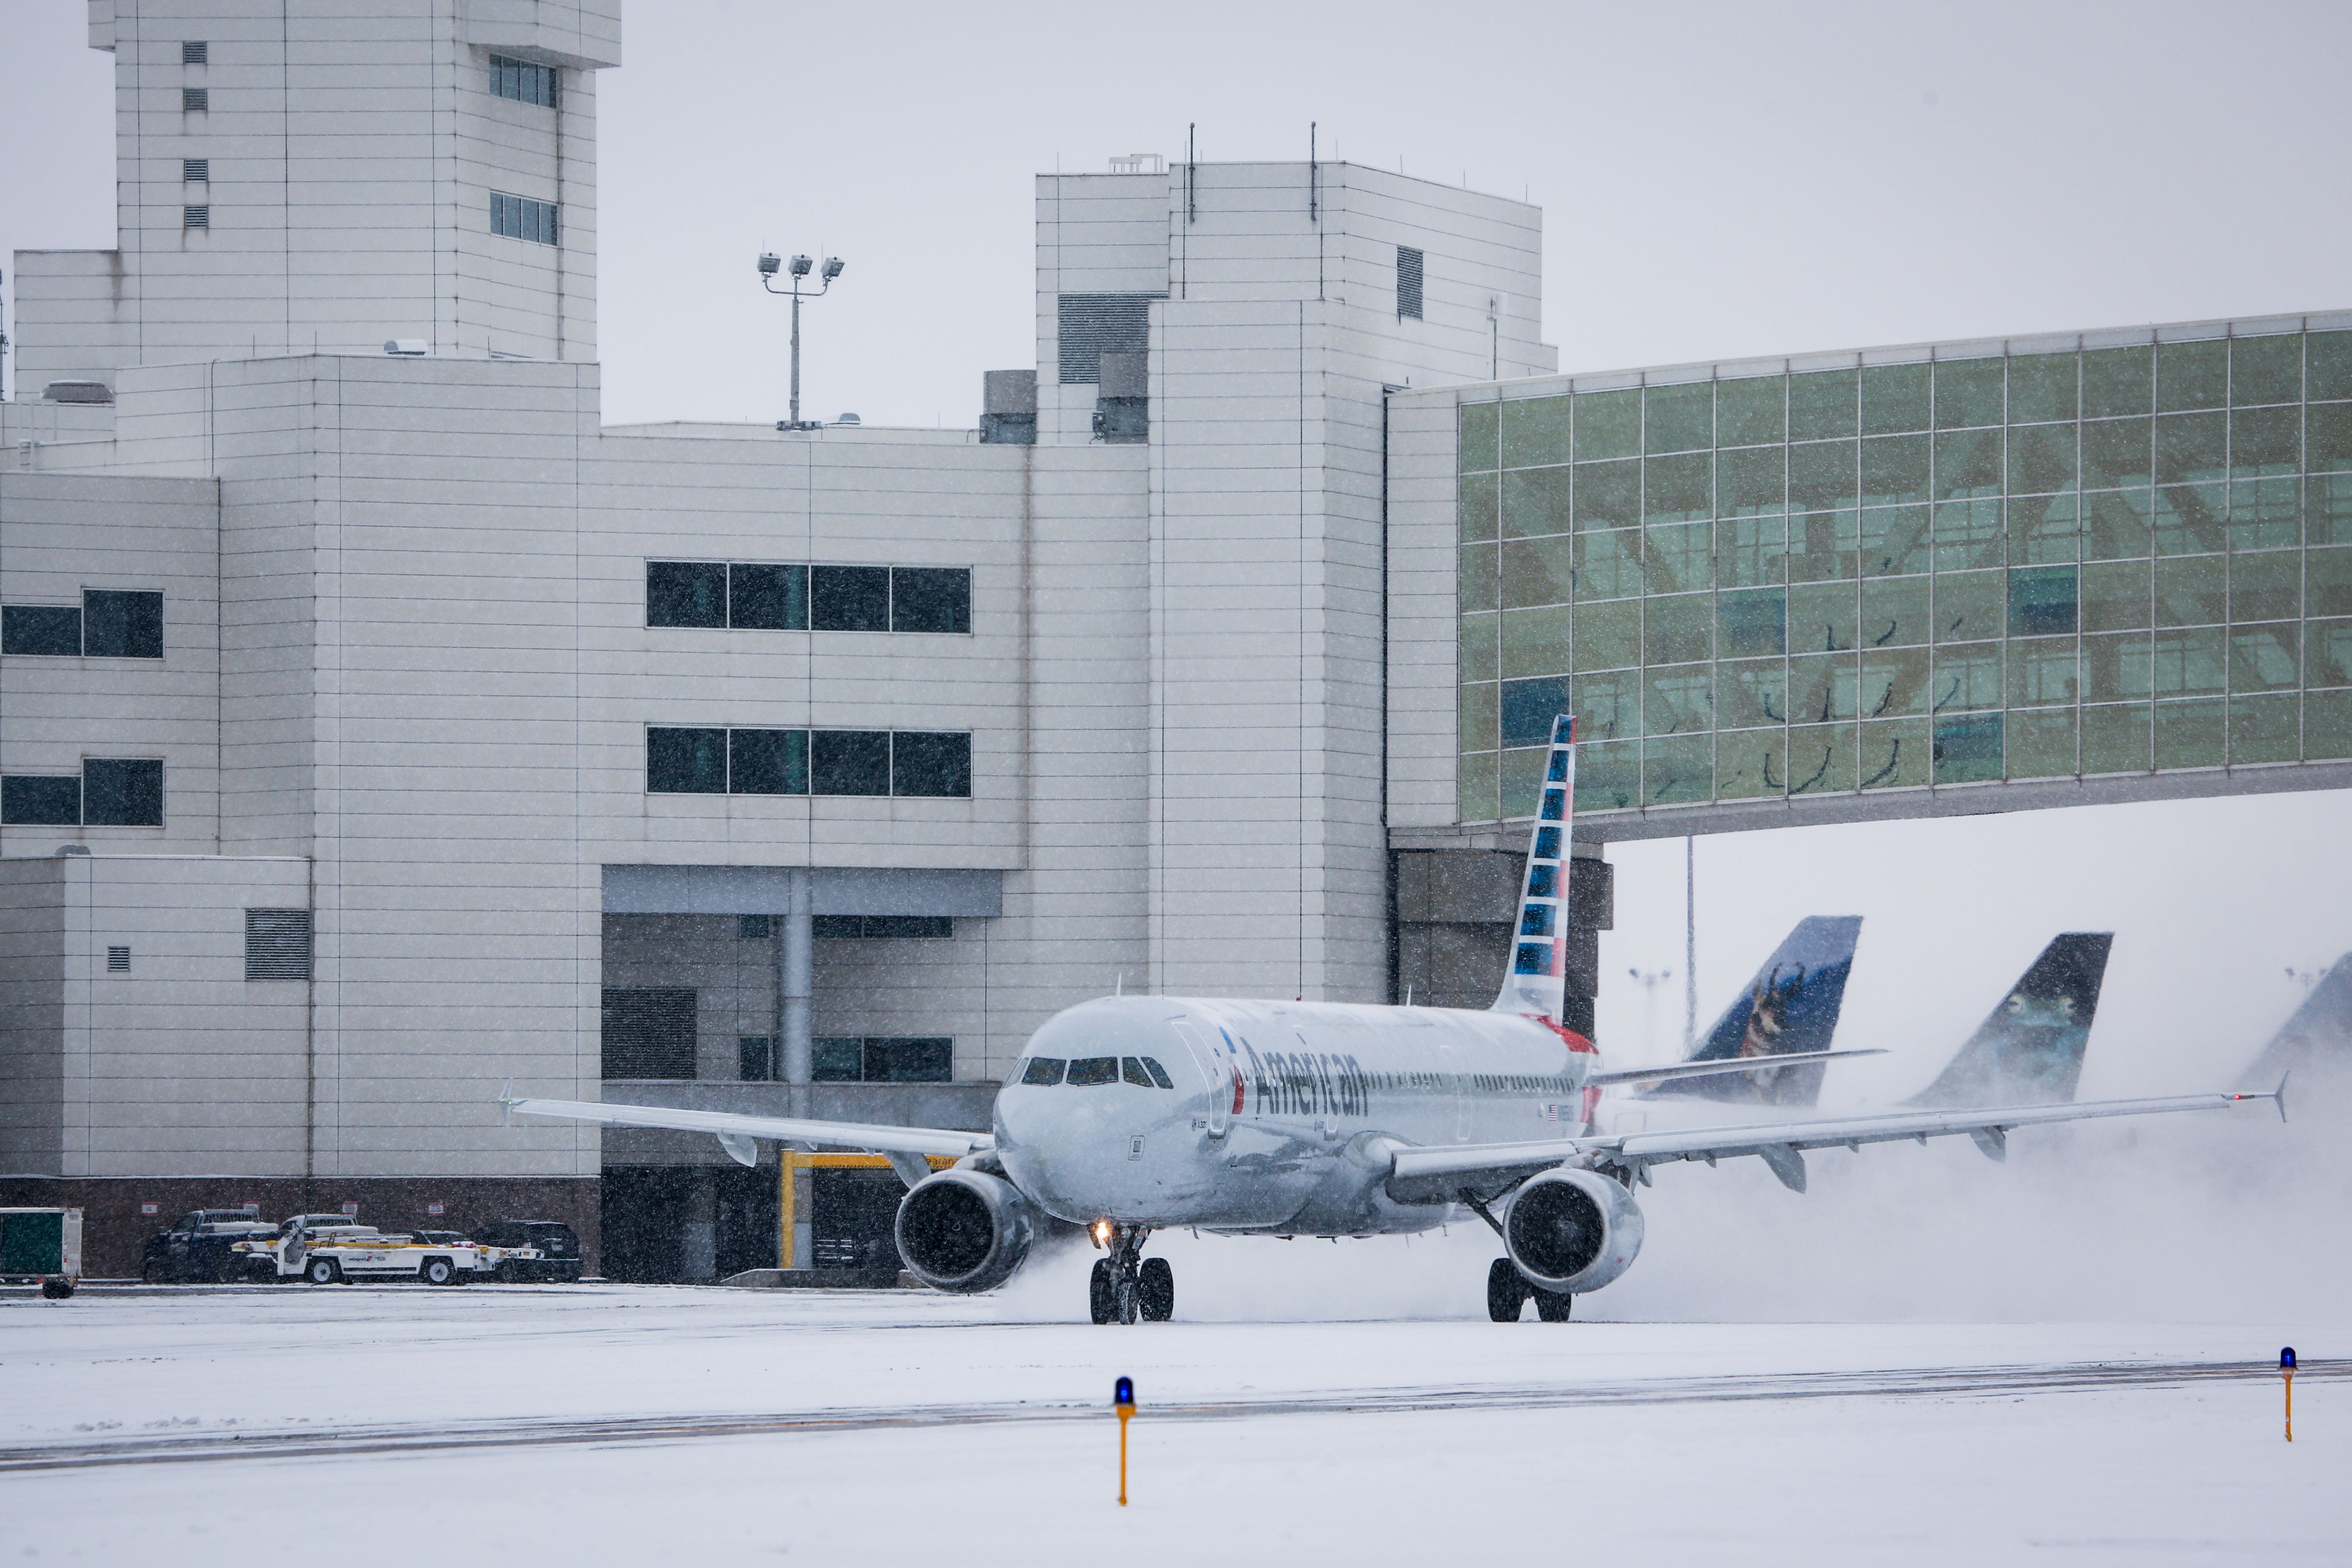 American Airlines aircraft taxis through snow